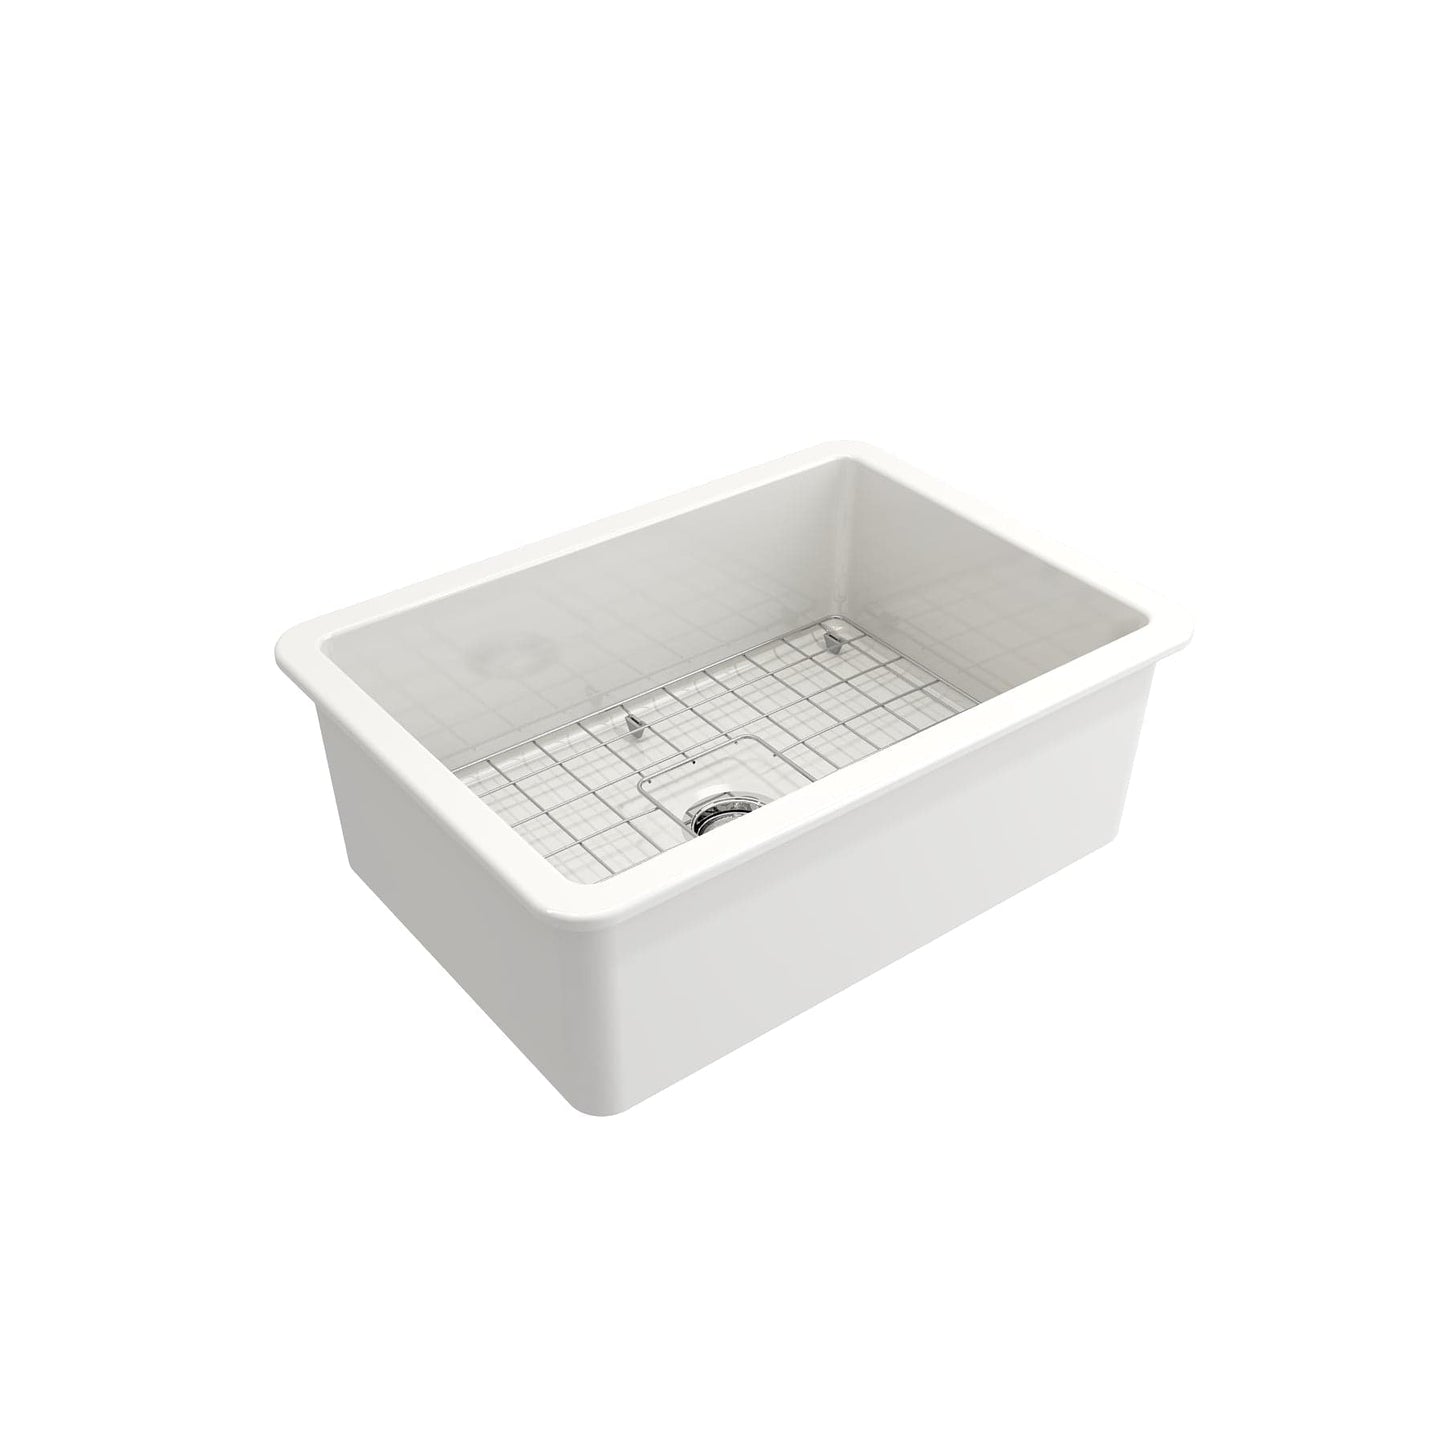 BOCCHI SOTTO 27" Fireclay Modern Undermount Single Bowl Kitchen Sink with Protective Bottom Grid and Strainer, WHITE - 1360-001-0120 - Manor House Sinks